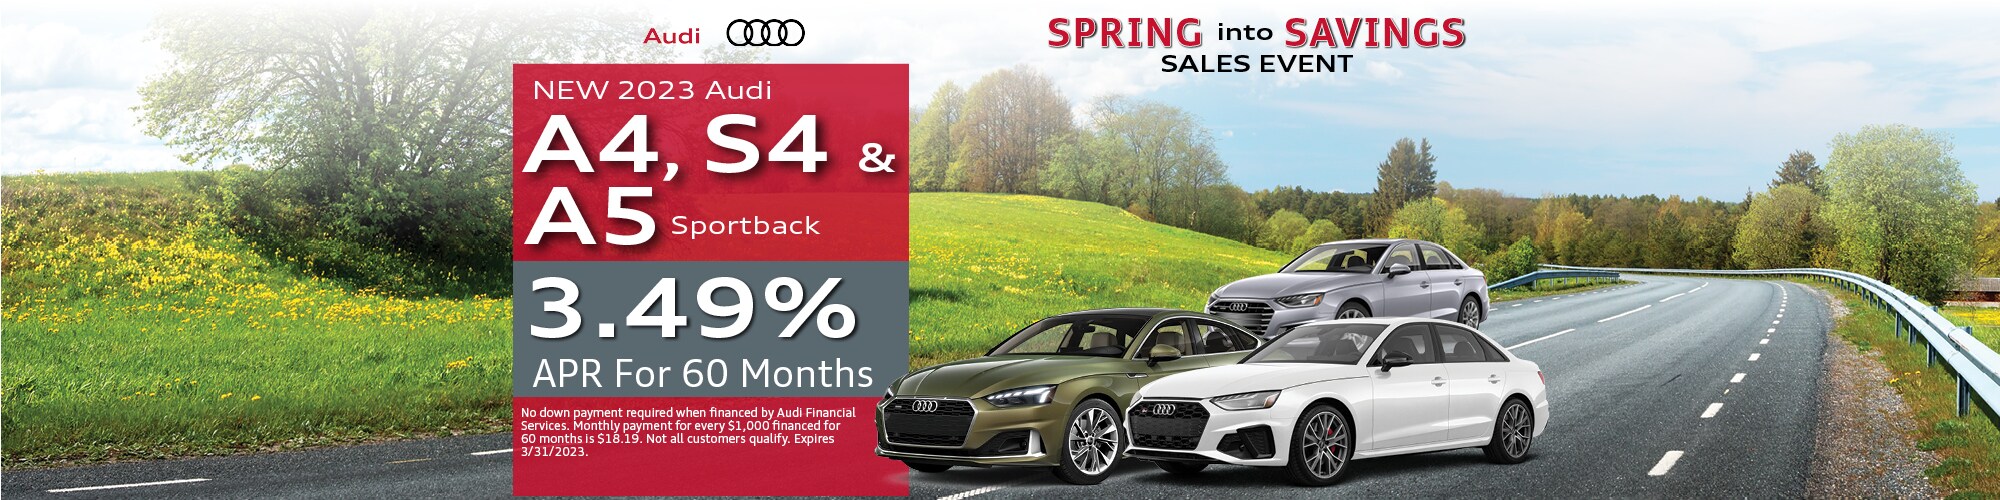 2023 Audi A4 and S4 Special Offer | Audi Hoffman Estates, IL